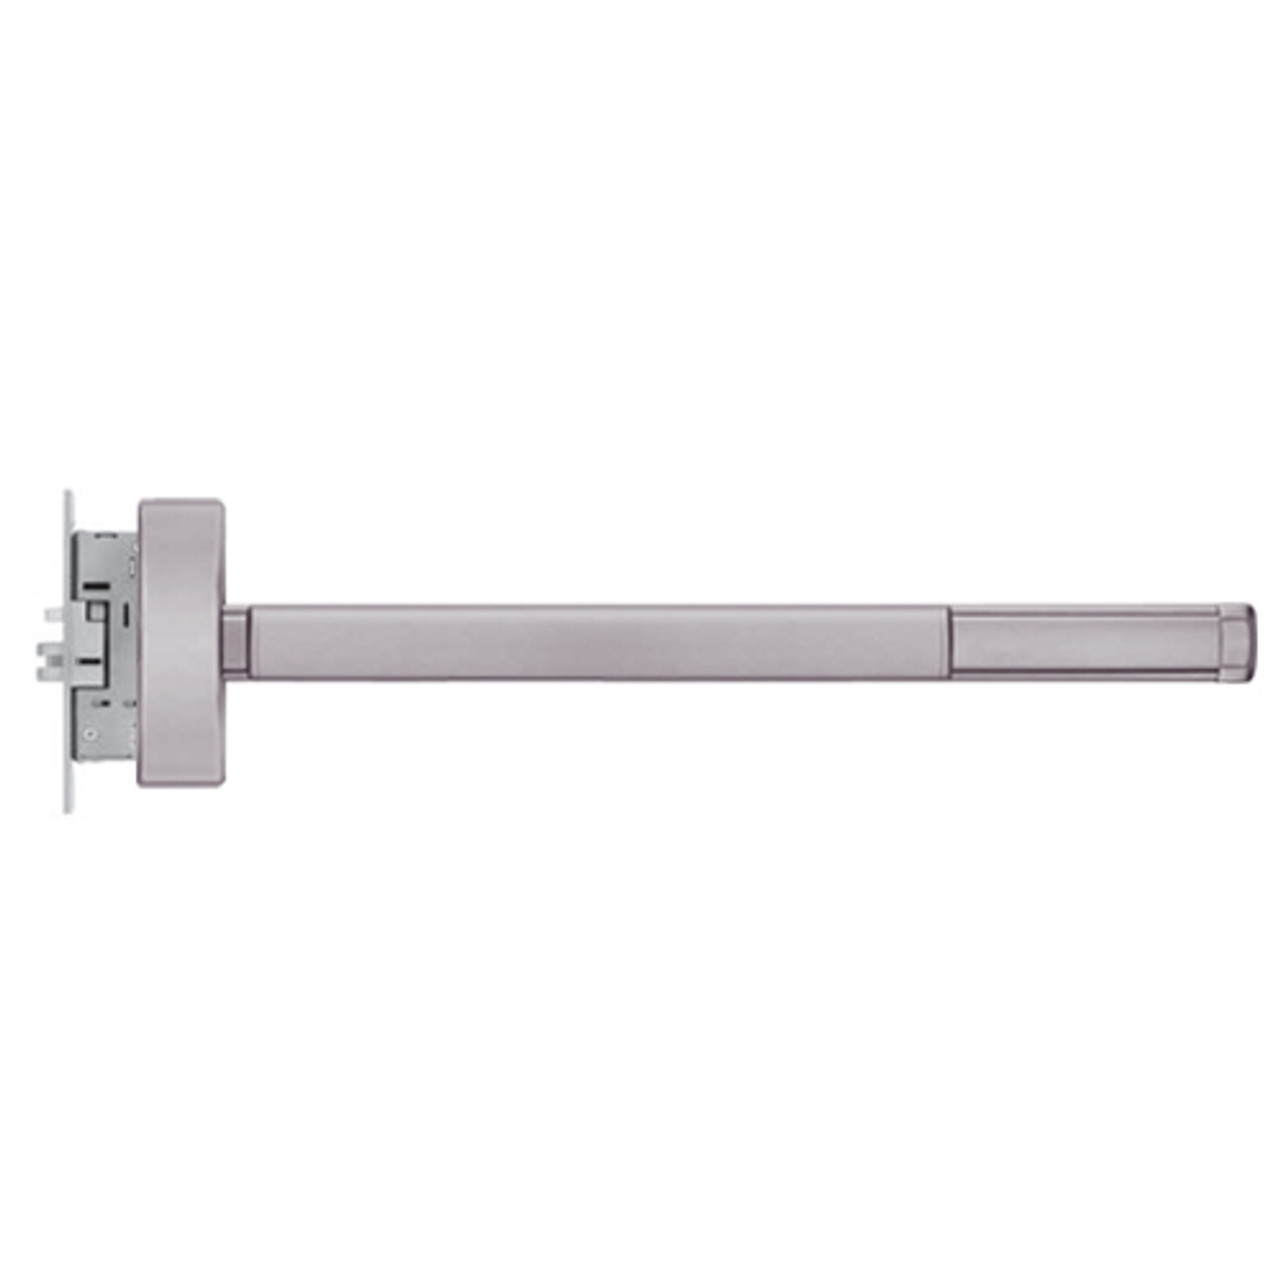 MLRFL2302-LHR-630-36 PHI 2300 Series Fire Rated Apex Mortise Exit Device with Motorized Latch Retraction Prepped for Dummy Trim in Satin Stainless Steel Finish